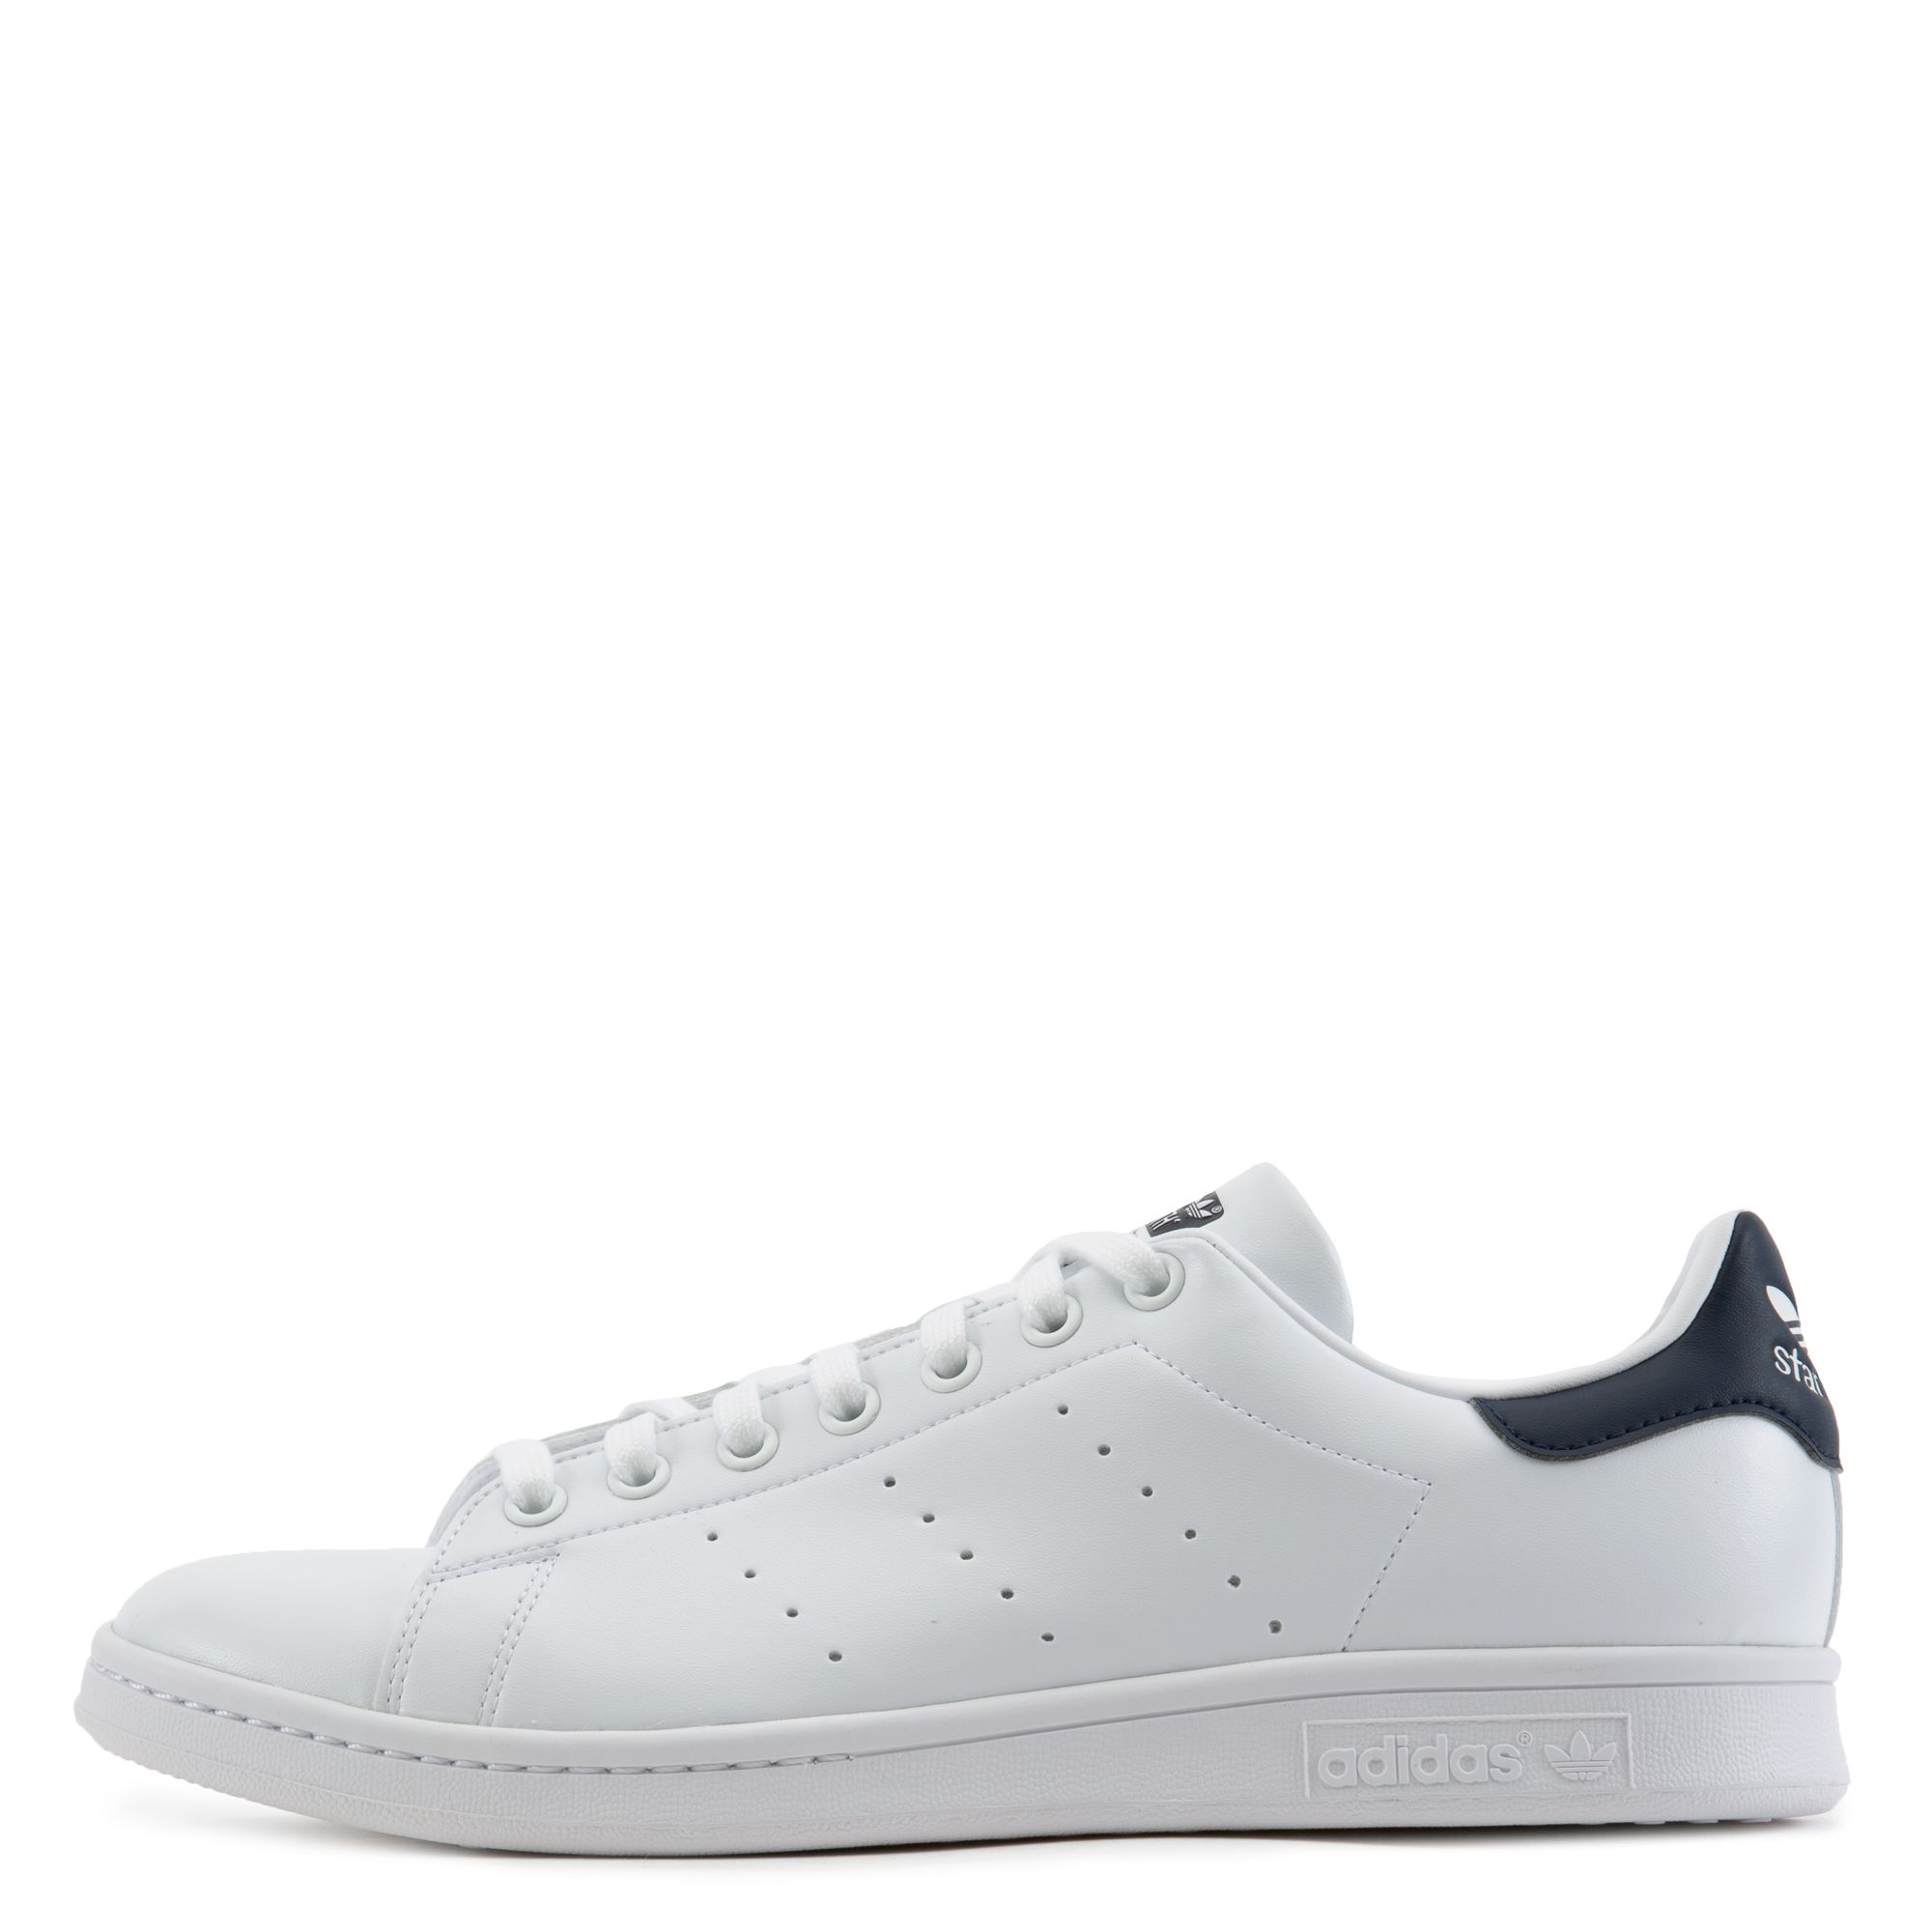 stan smith shoes navy